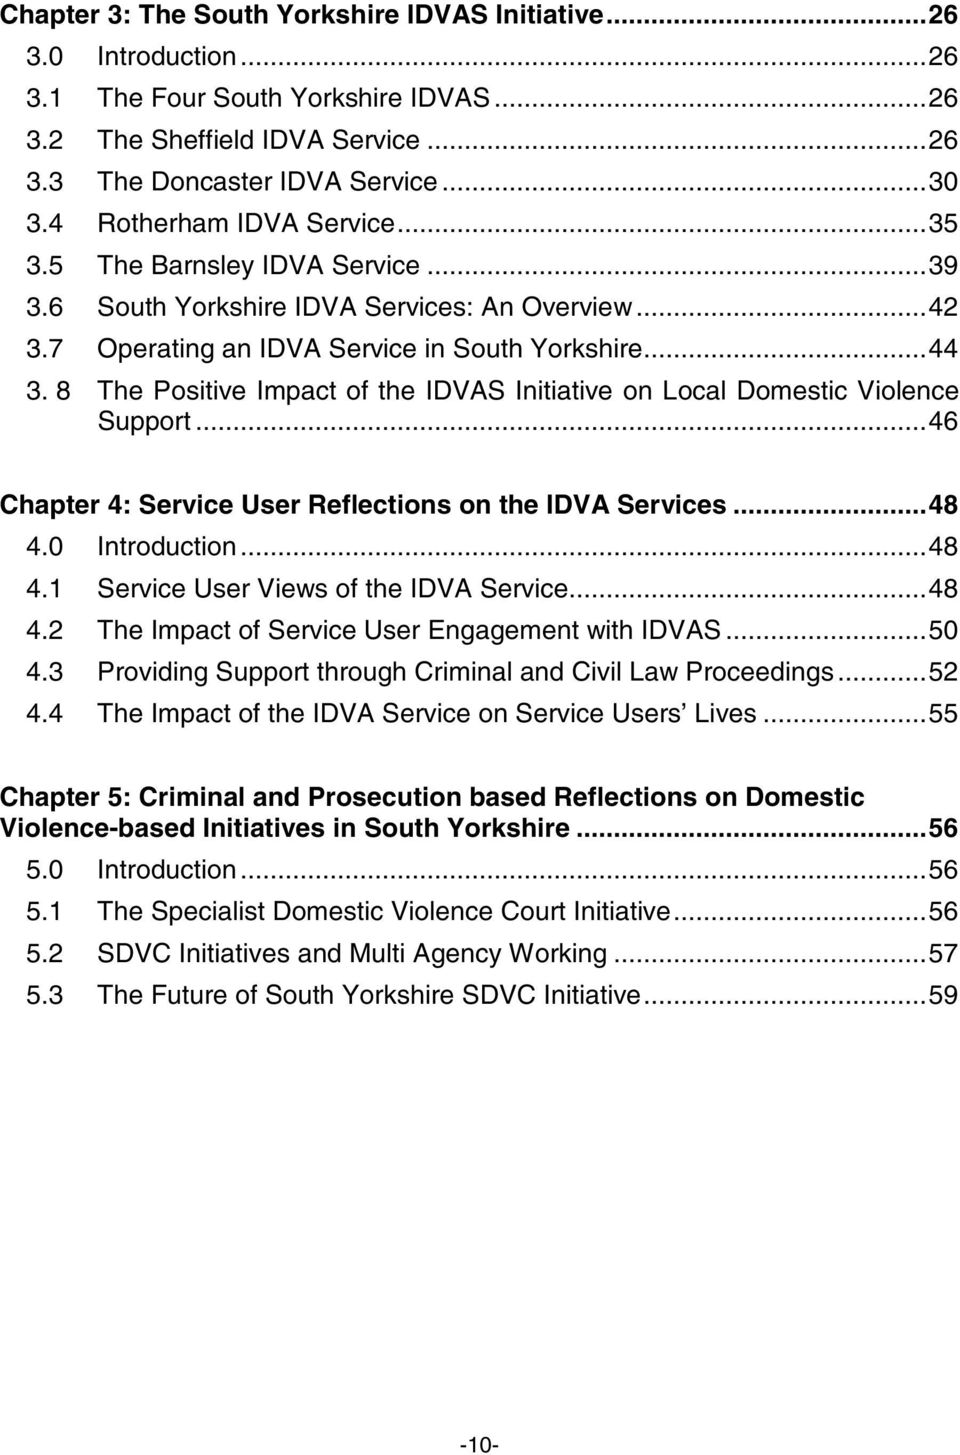 8 The Positive Impact of the IDVAS Initiative on Local Domestic Violence Support...46 Chapter 4: Service User Reflections on the IDVA Services...48 4.0 Introduction...48 4.1 Service User Views of the IDVA Service.